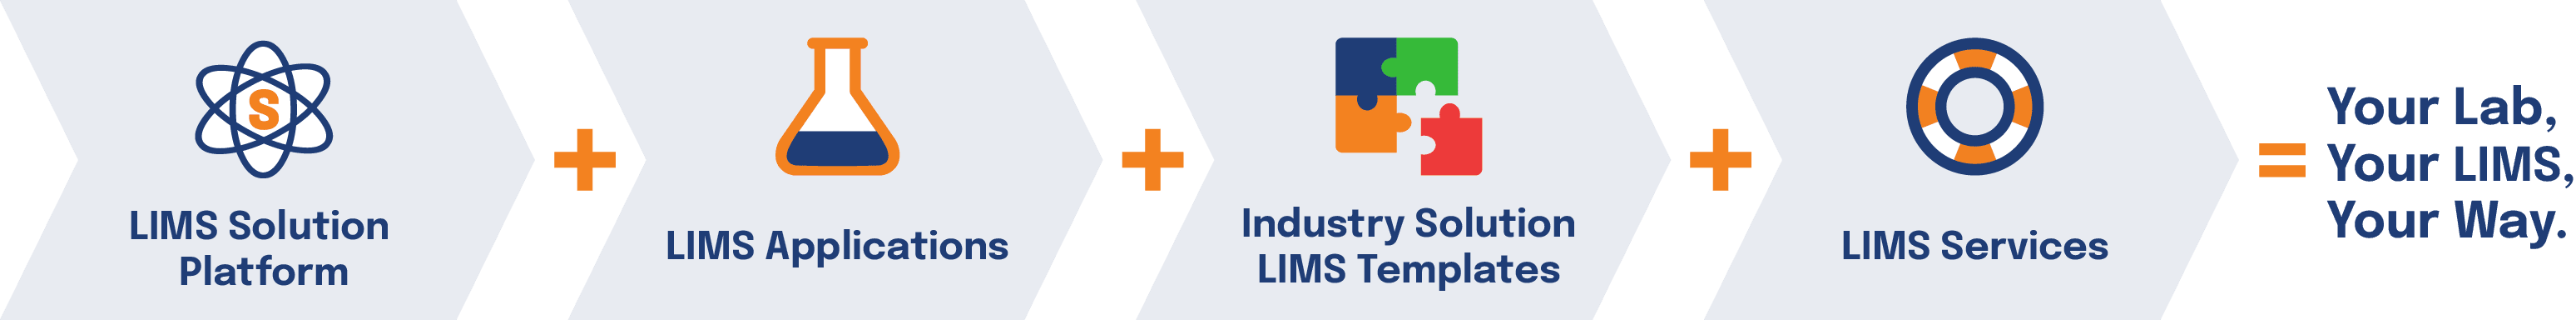 Your Lab, Your LIMS, Your Way. | LabLynx LIMS Solution